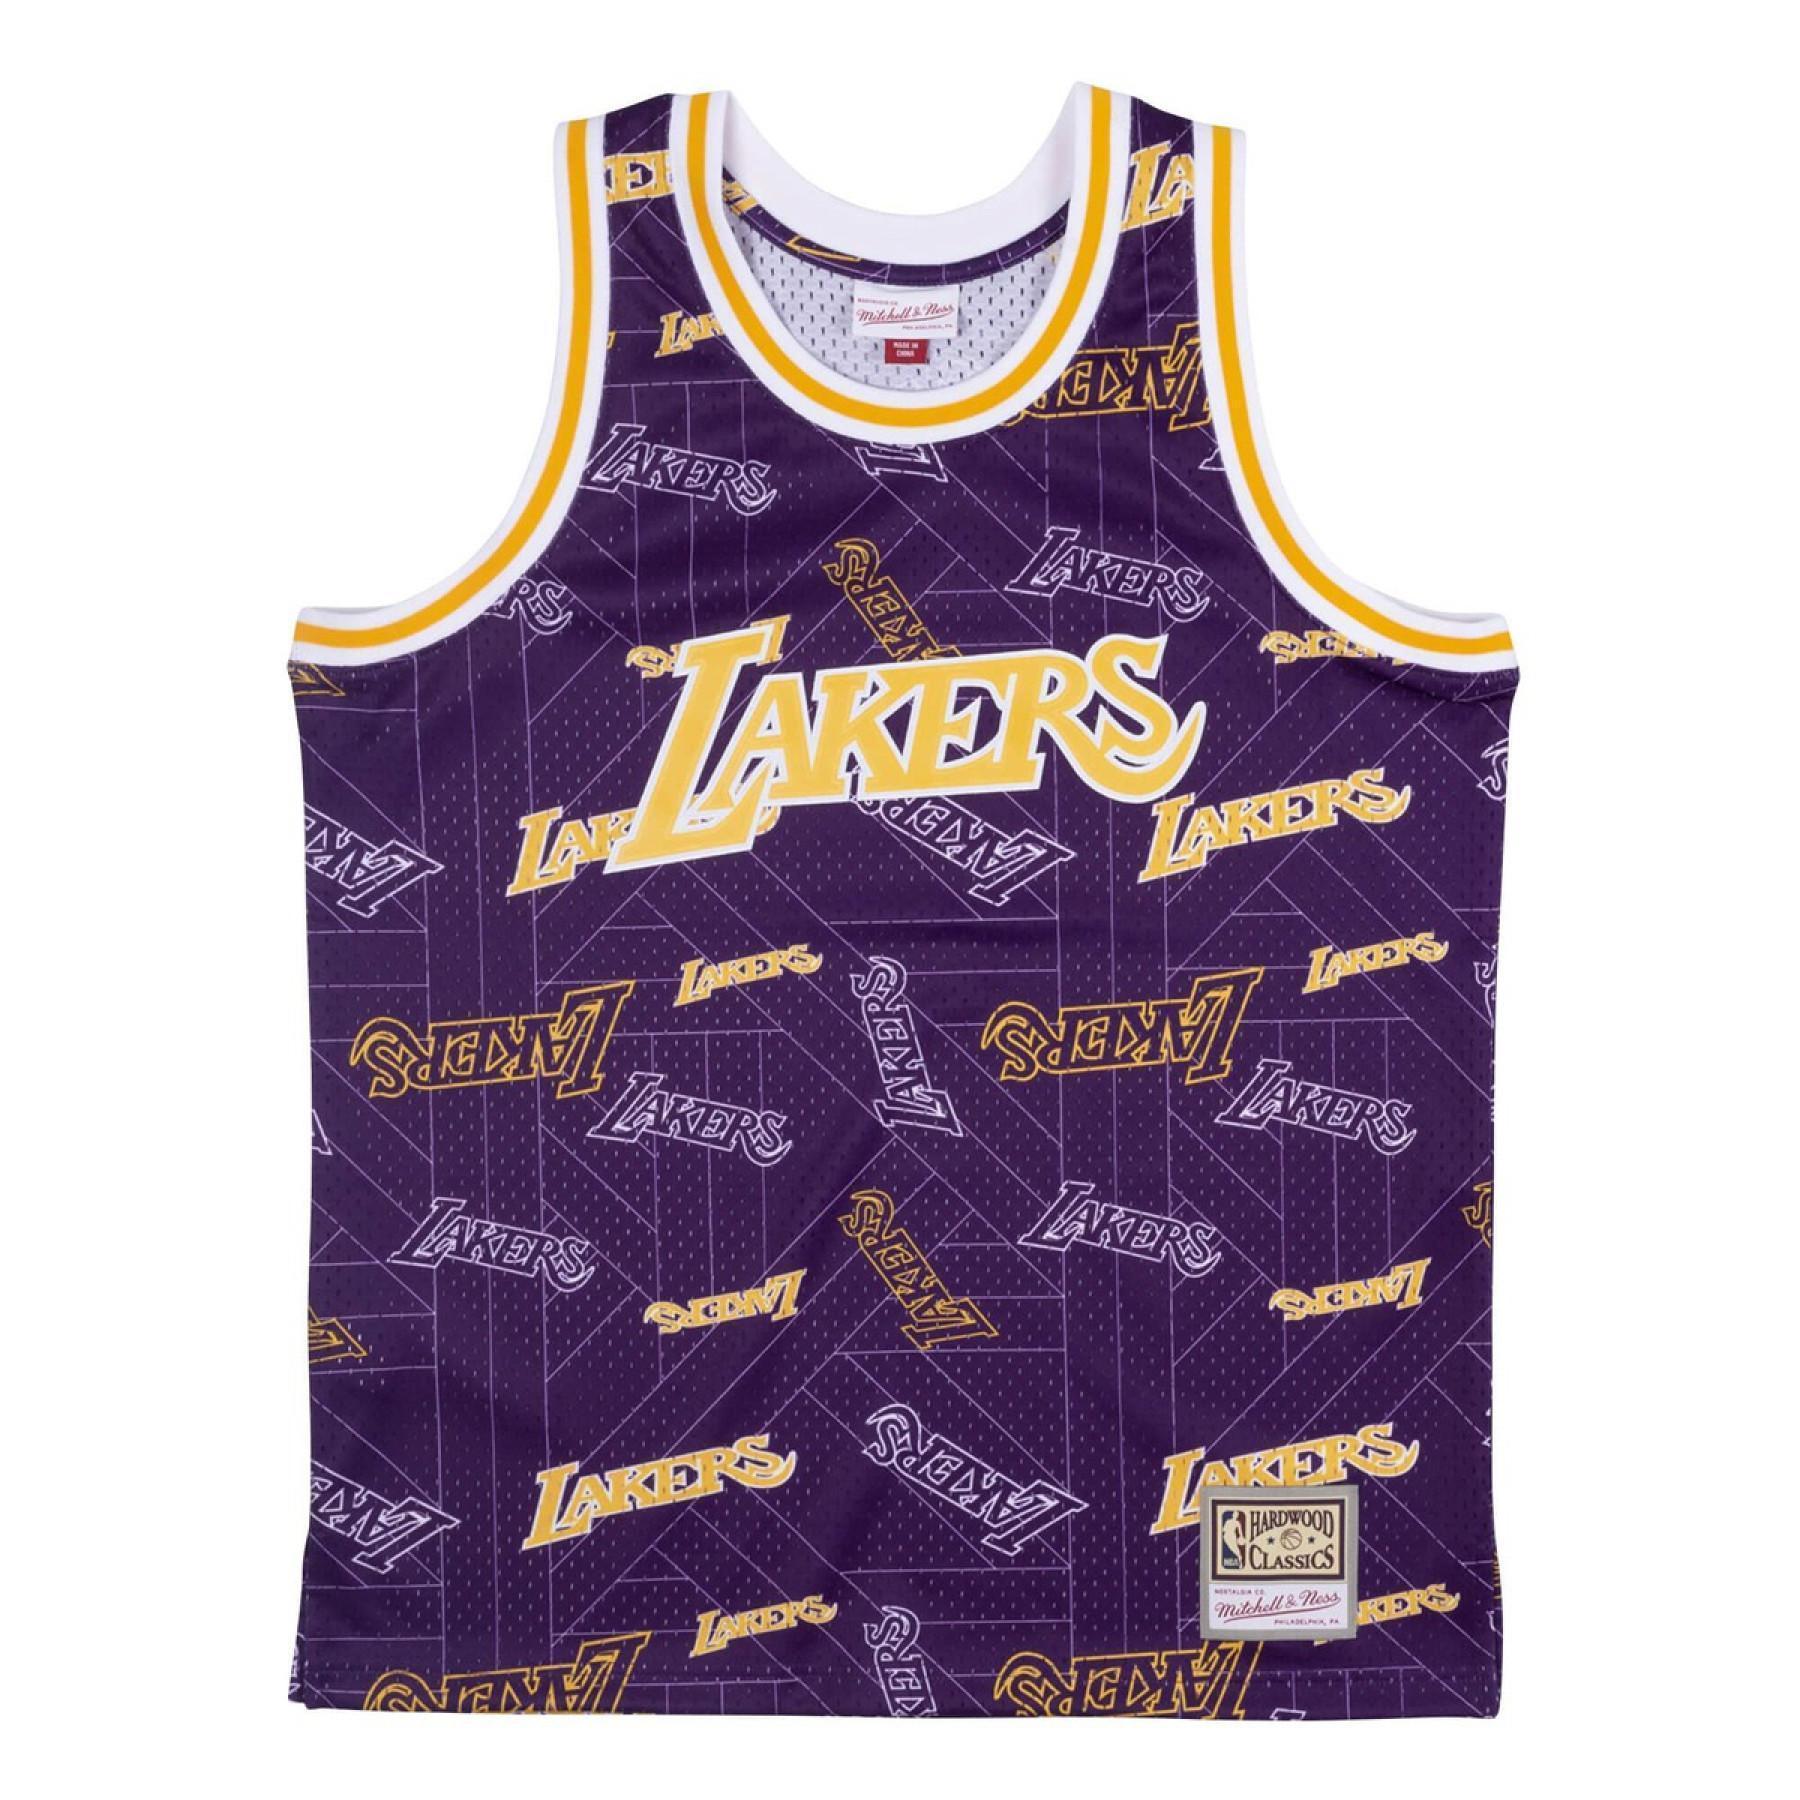 Jersey Los Angeles Lakers tear up